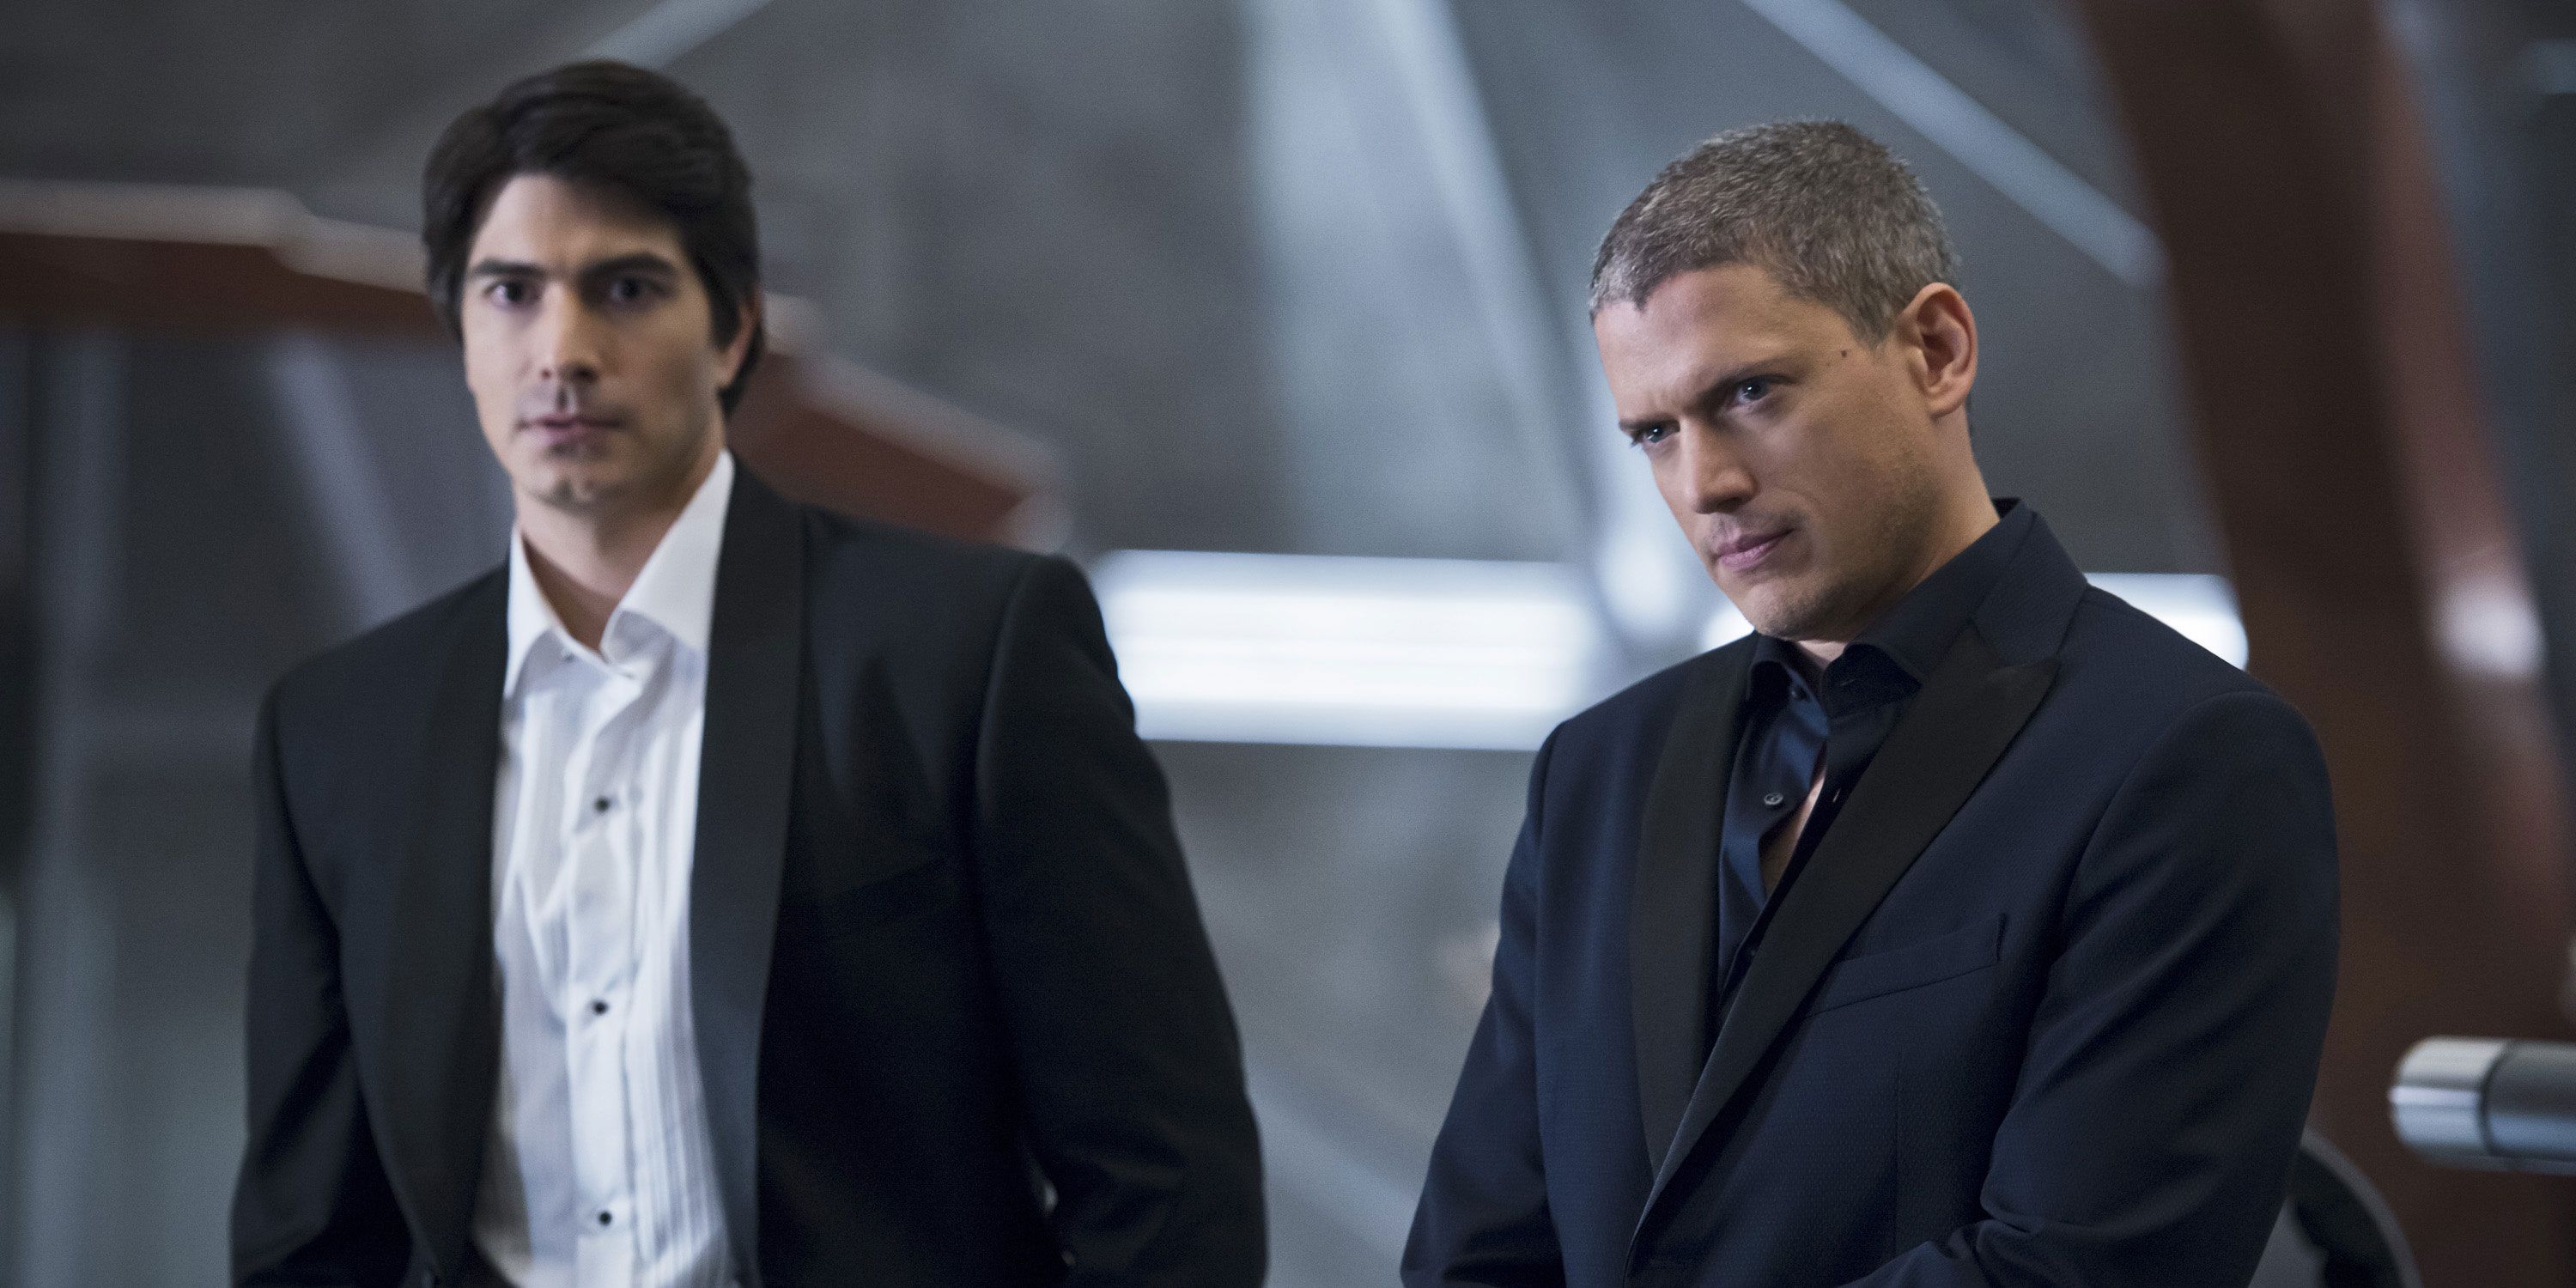 Legends of Tomorrow Ray Palmer Atom and Captain Cold Leonard Snart